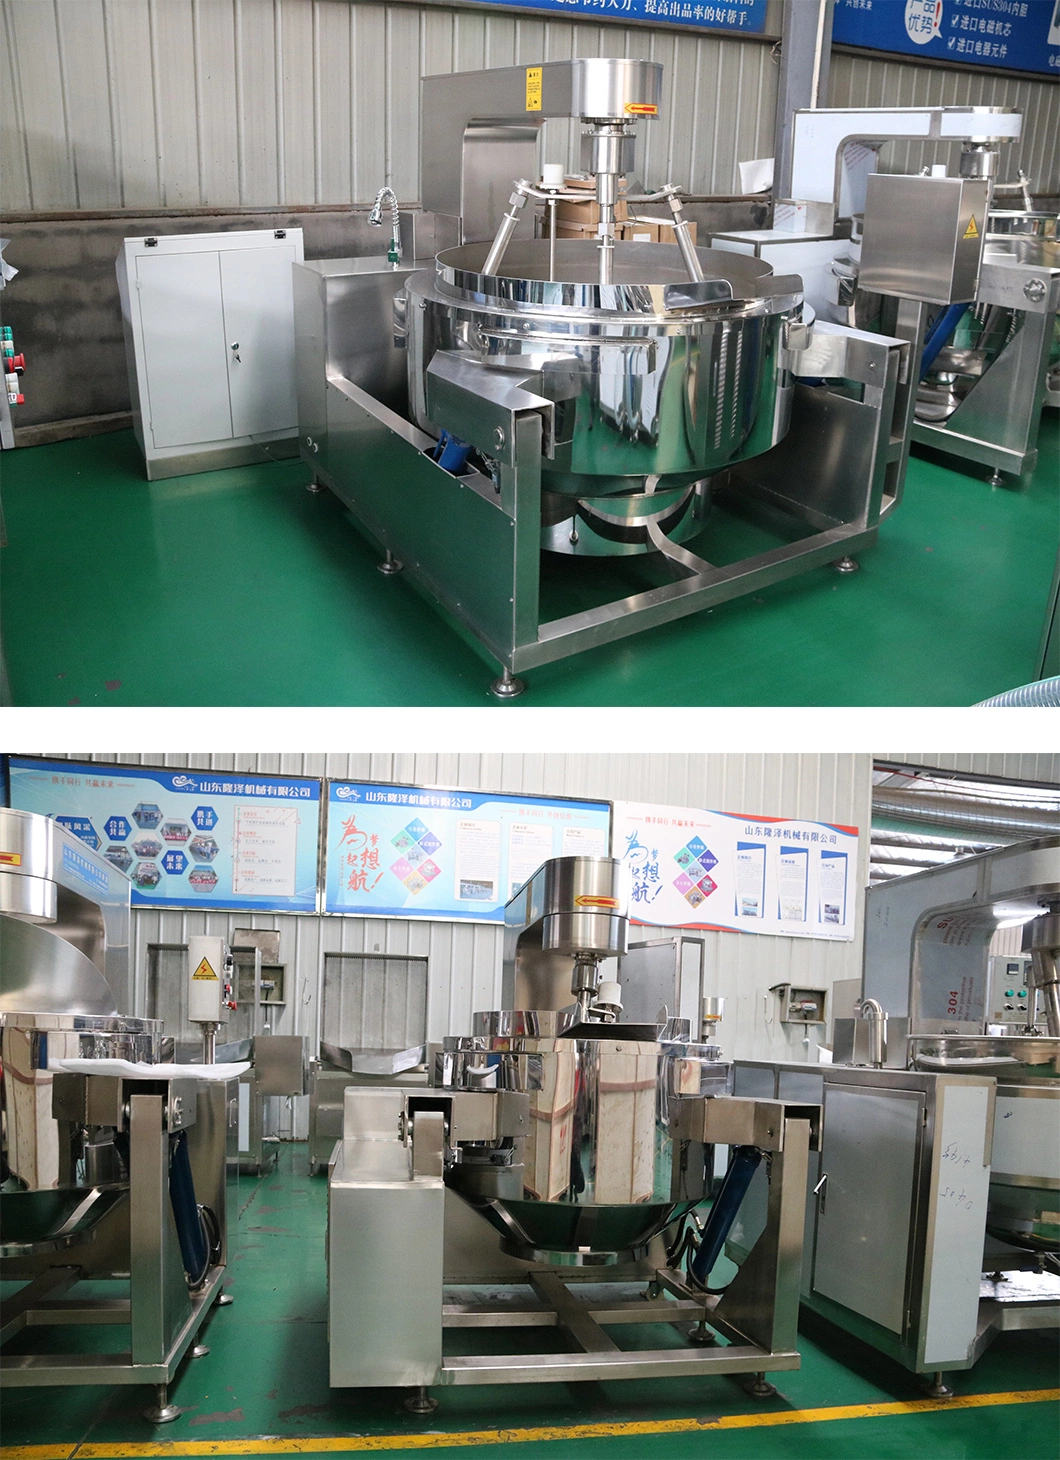 Restaurant Commercial Automatic Multi Function Planetary Tilting Curry Chili Bean Paste Mixing Making Electric Gas Steam Sweetener Sauce Cooking Wok